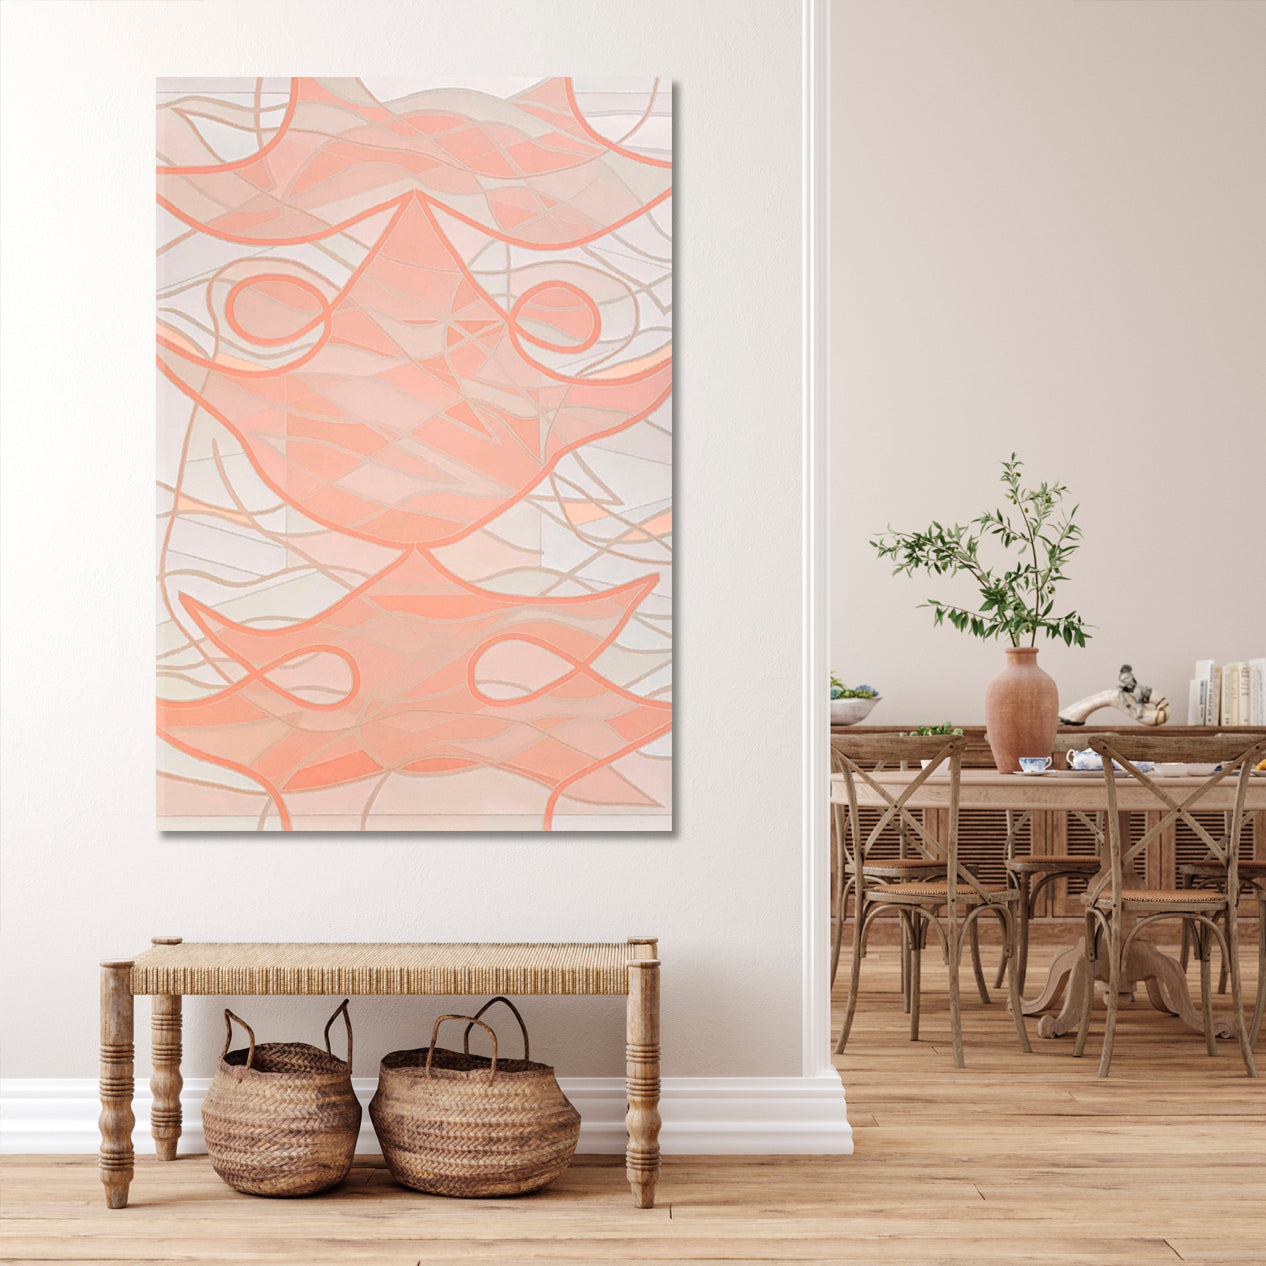 SOFT TENDER CORAL PASTEL Tangle of Lines Forms Color Fields Abstract Art Print Artesty   